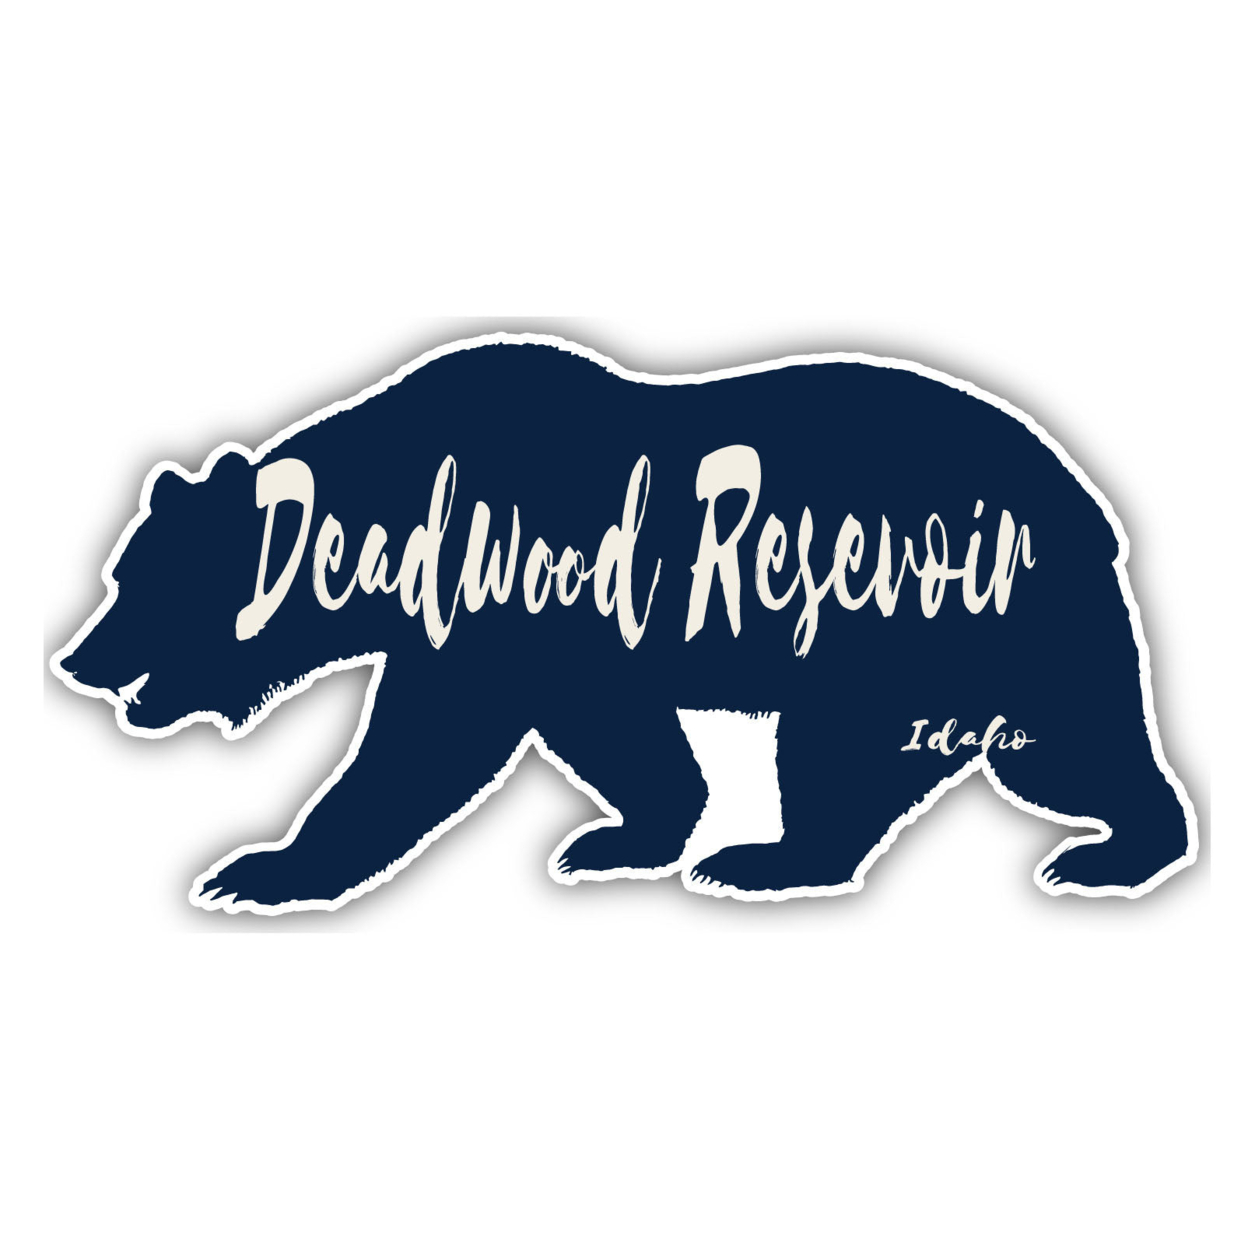 Deadwood Resevoir Idaho Souvenir Decorative Stickers (Choose Theme And Size) - 4-Pack, 8-Inch, Bear